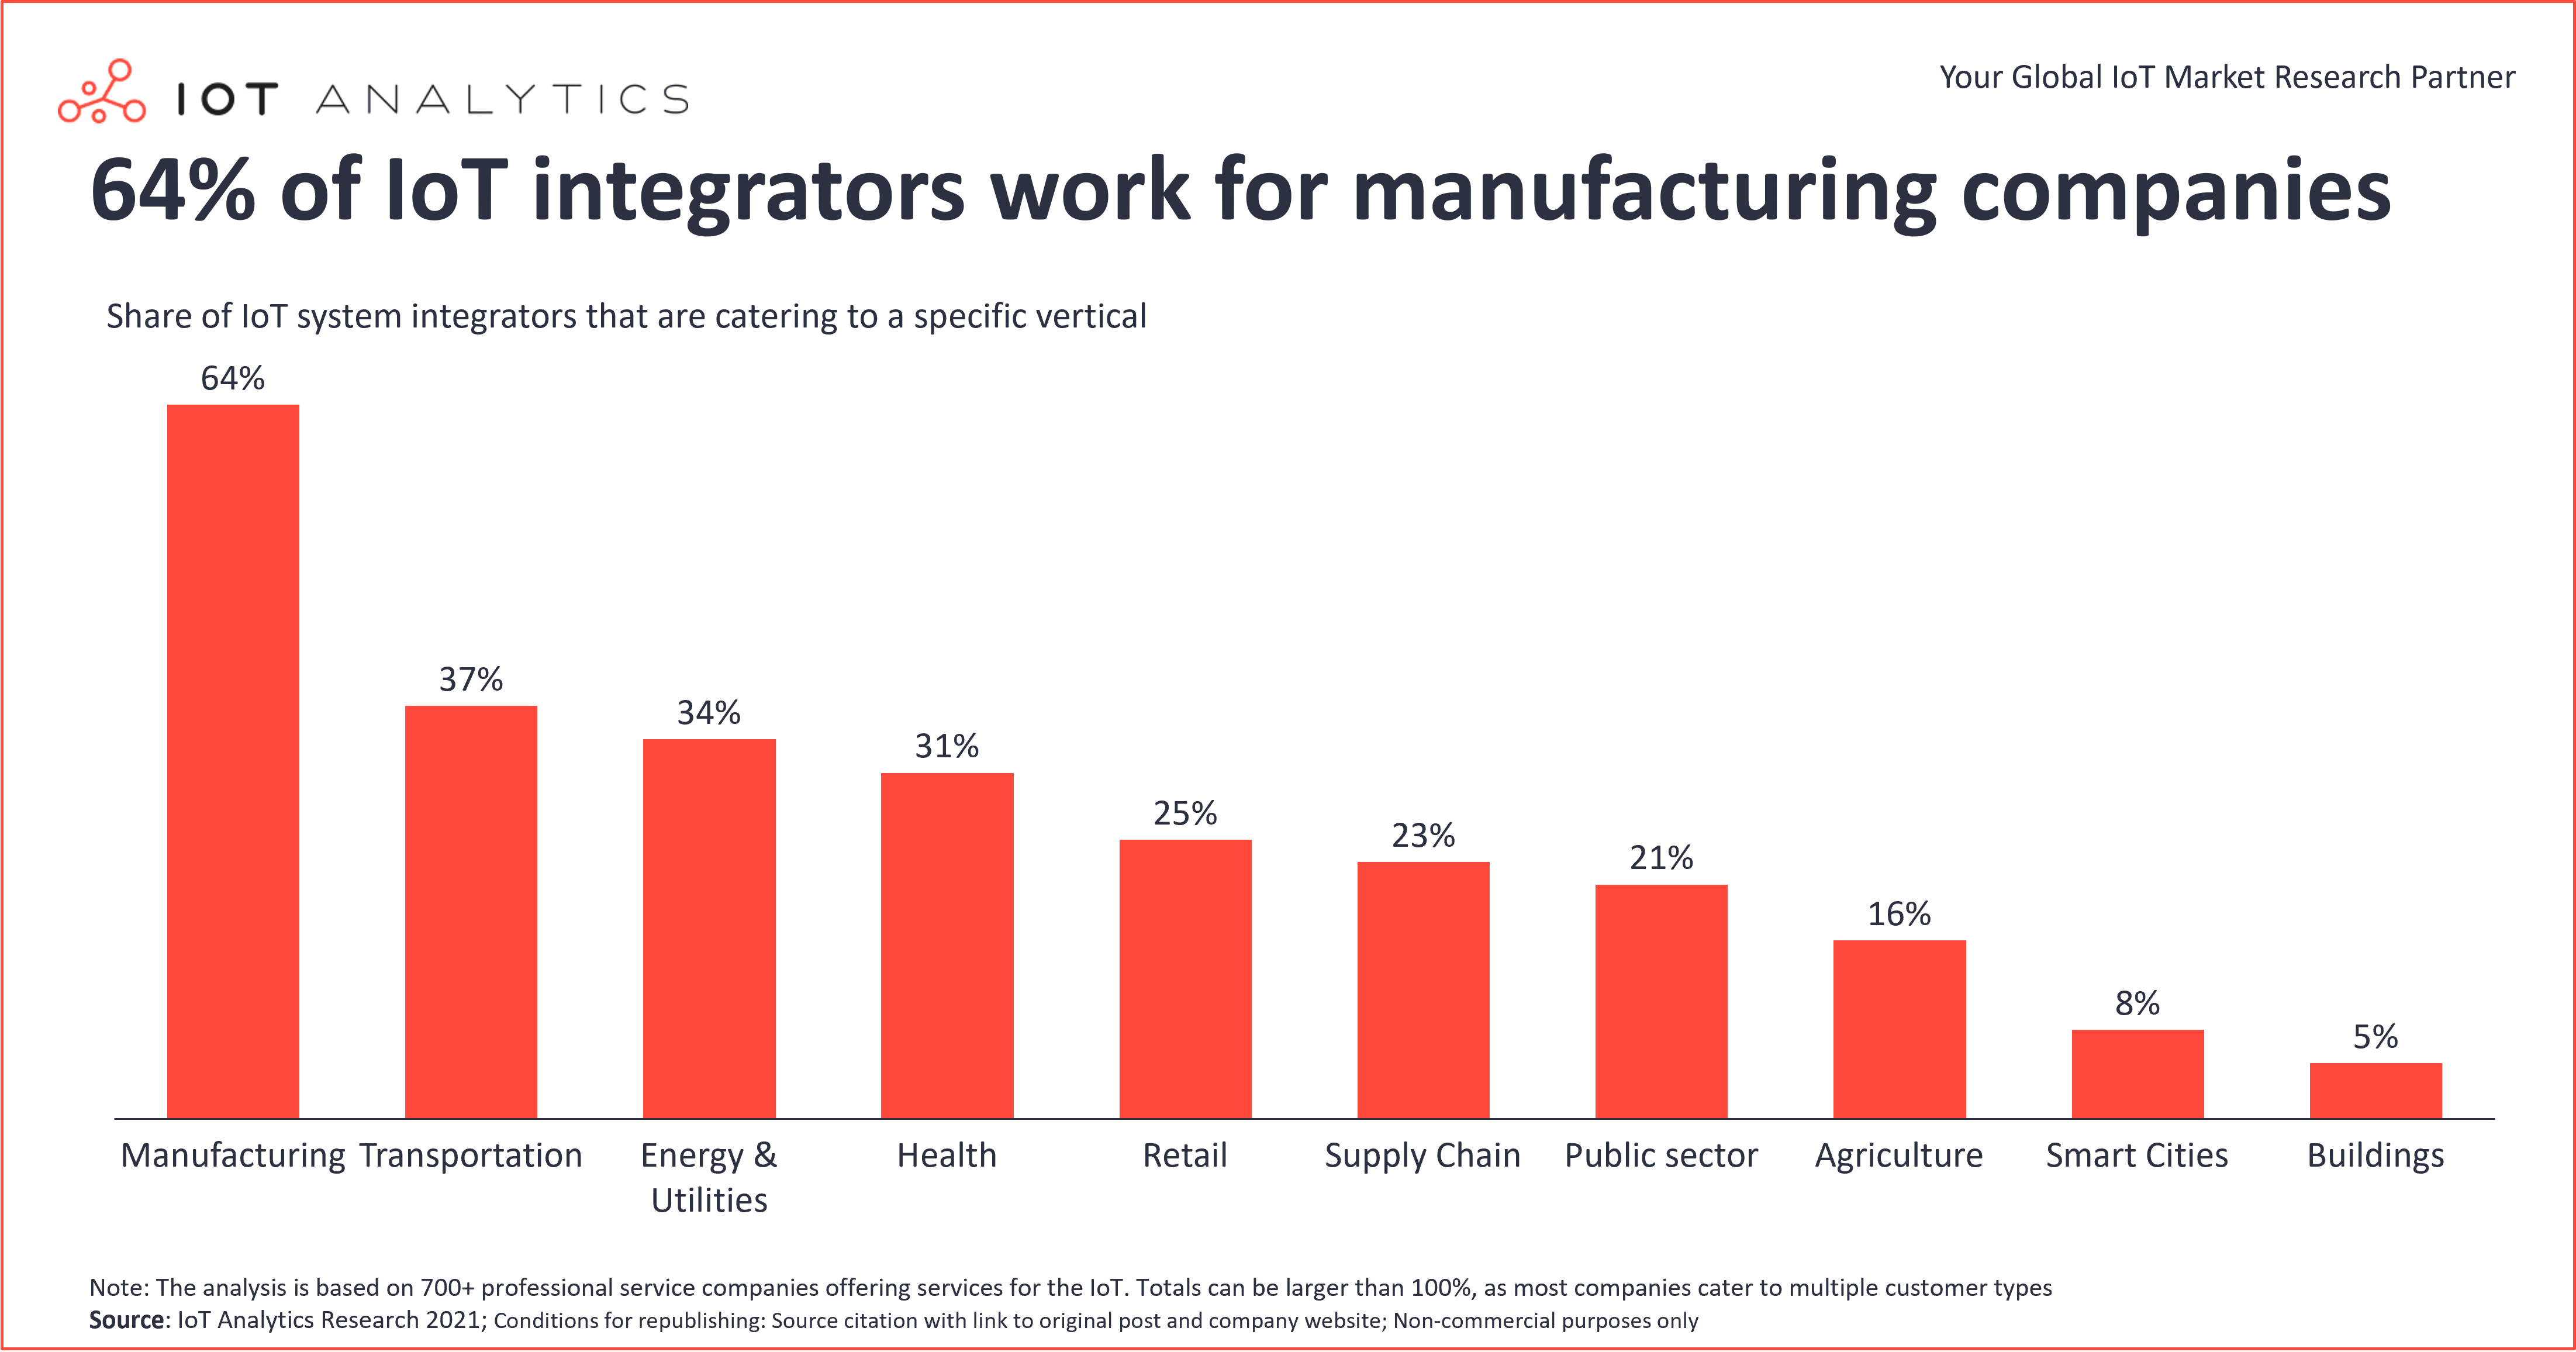 64 Percent of IoT integrators work for manufacturing companies